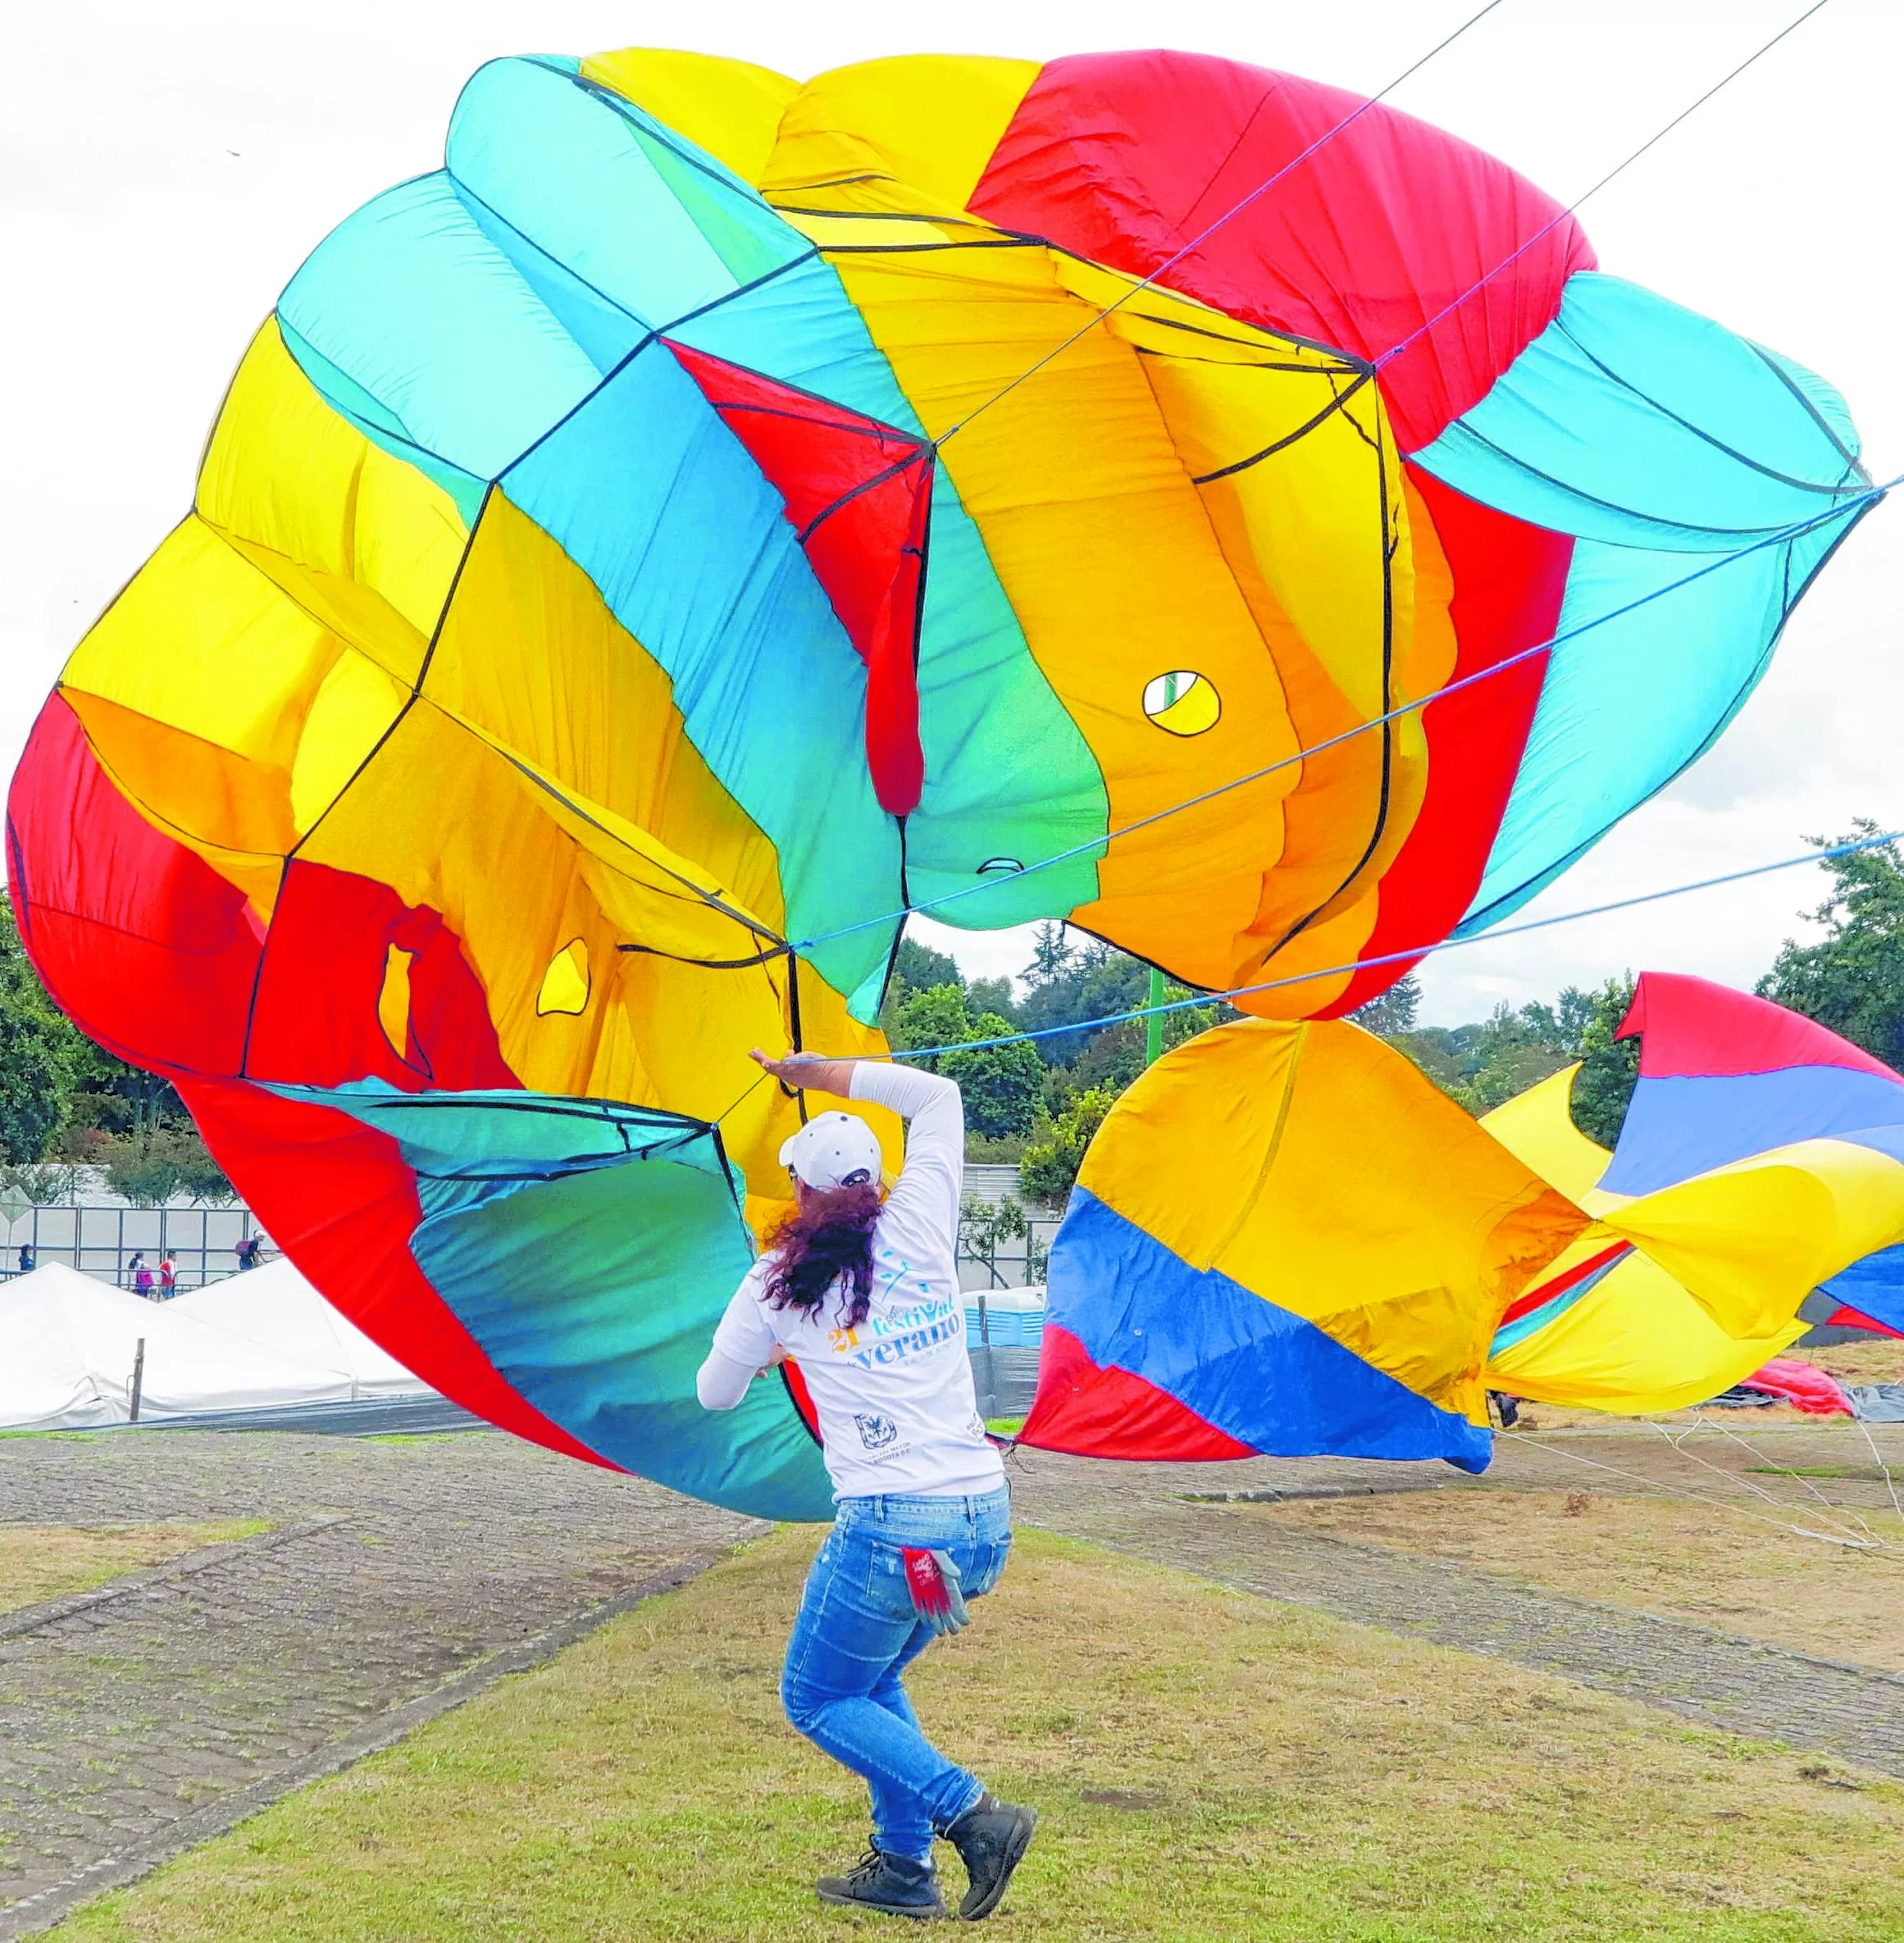 Kites take over the sky in August, what is their history in Colombia?
